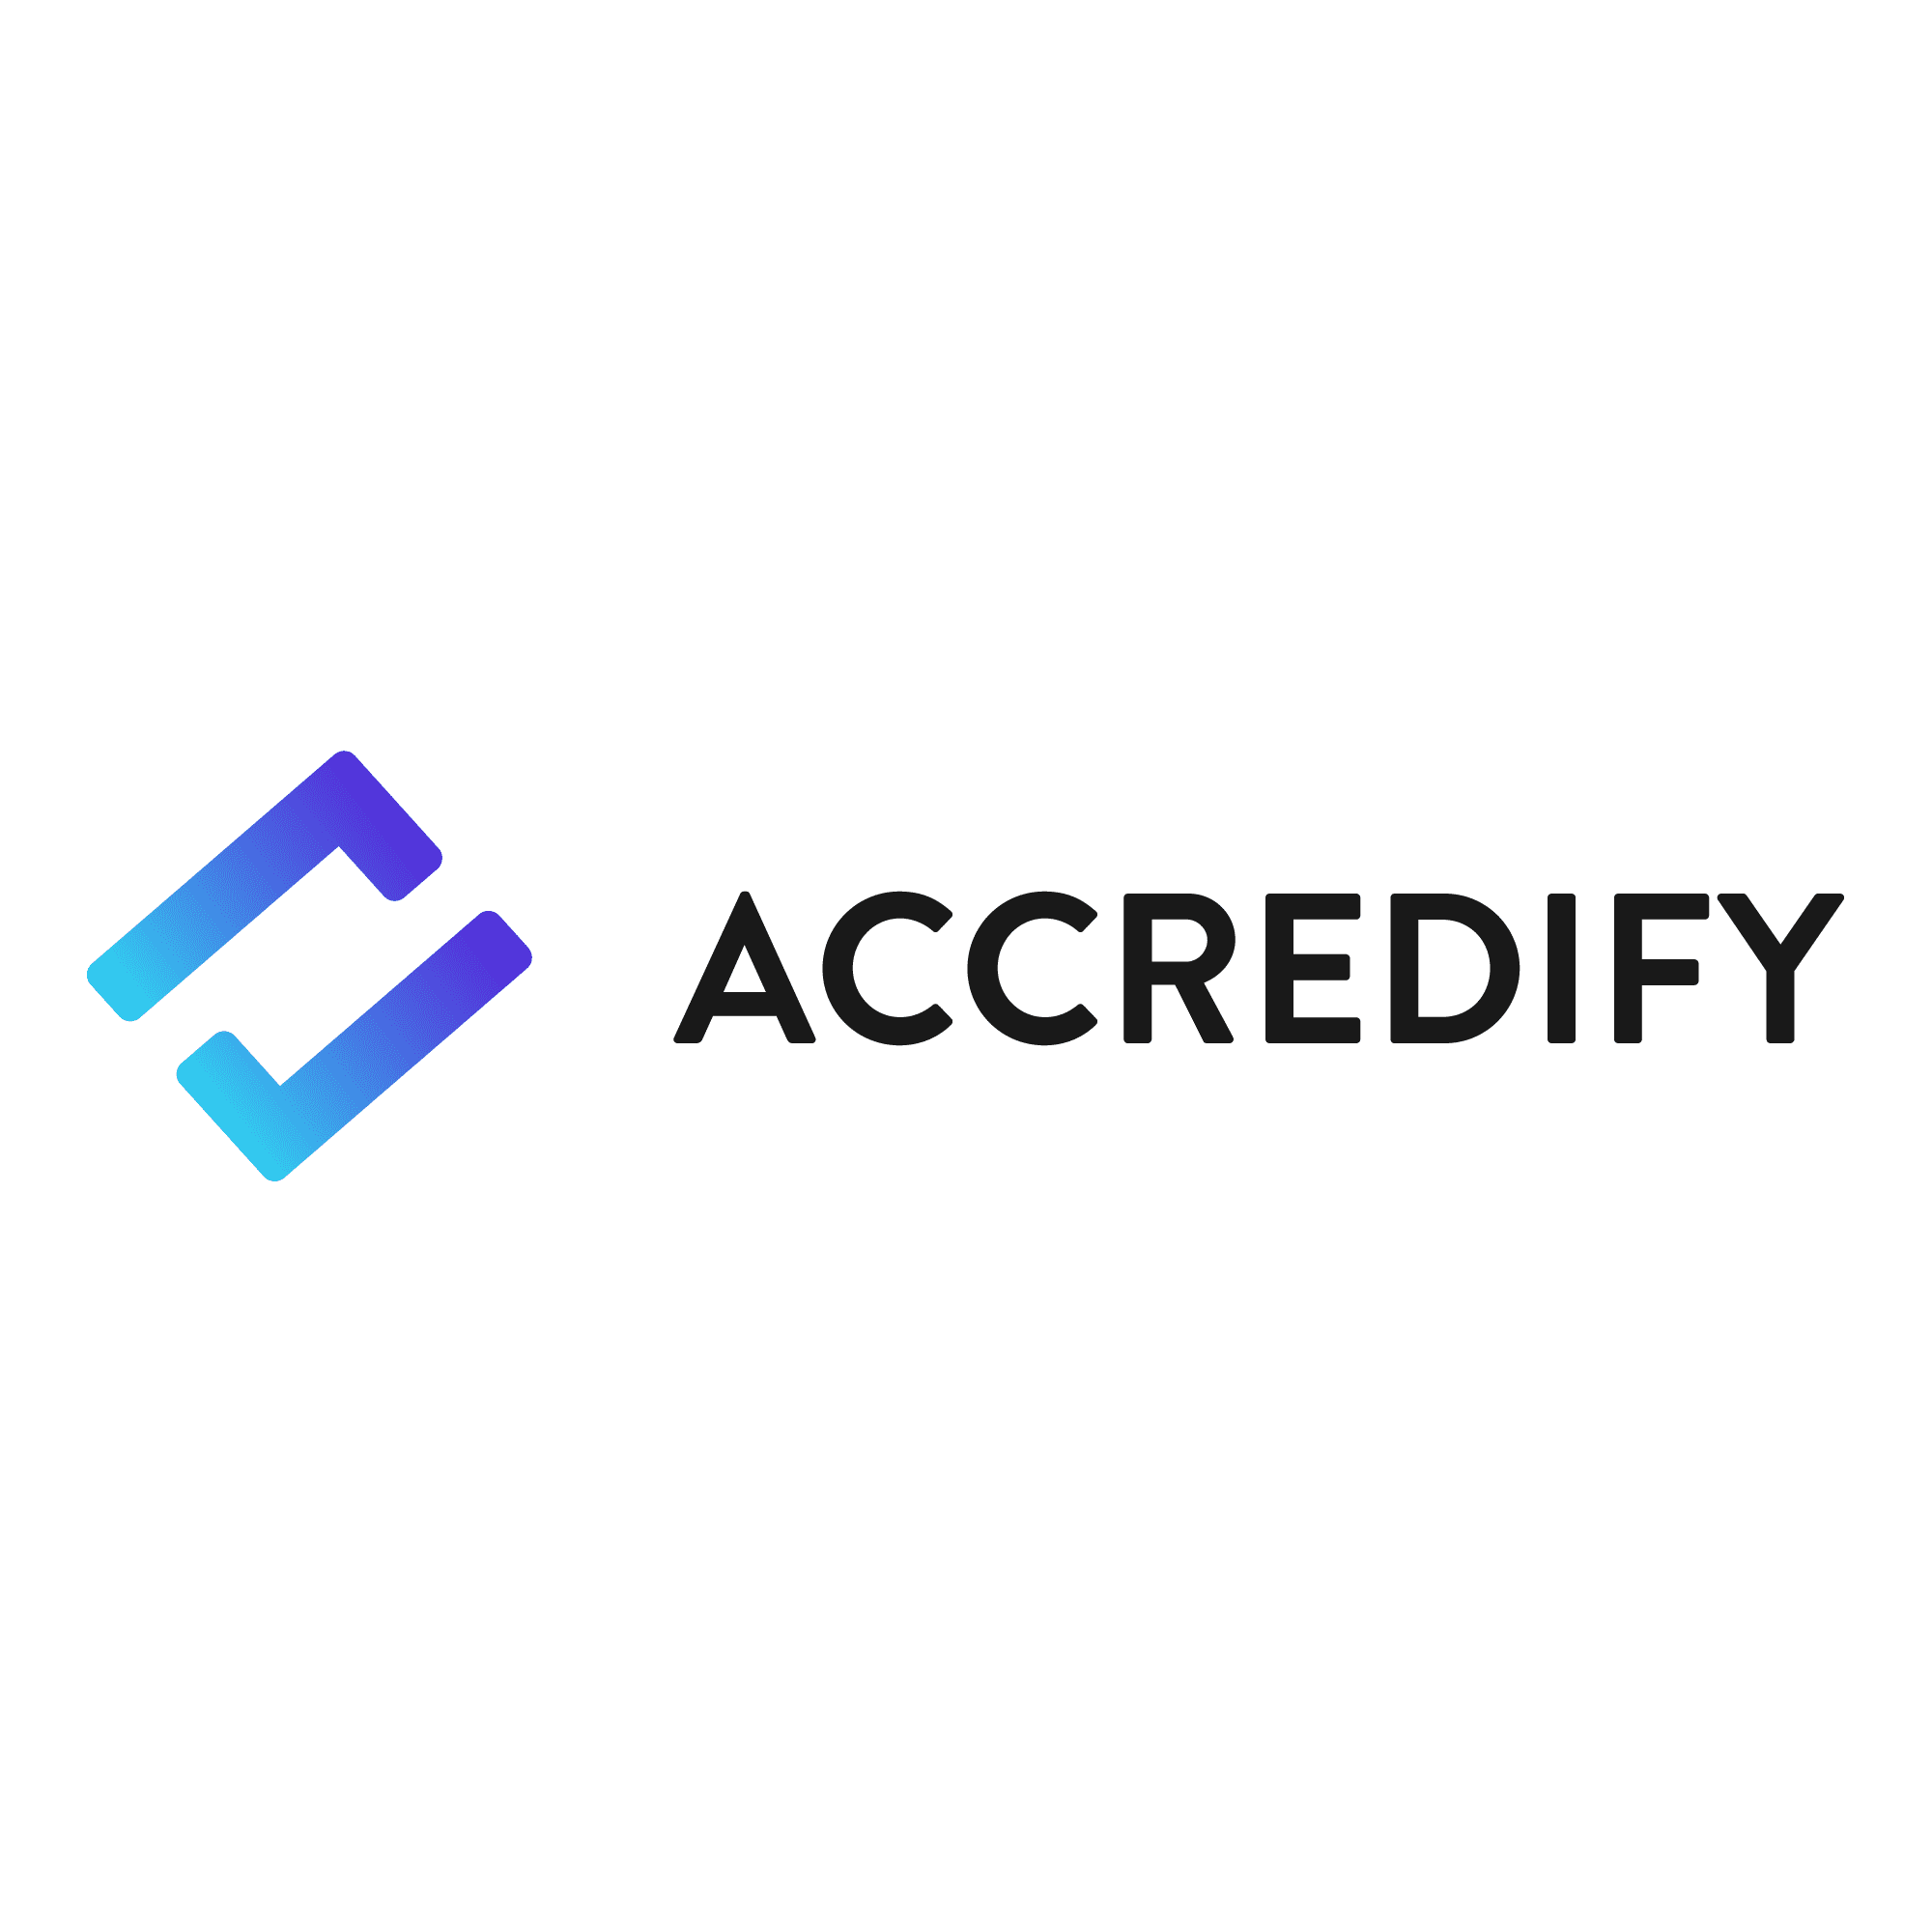 Accredify and Breathonix Partner to Issue Verifiable Test Results for 60-second COVID-19 Rapid Breath Test